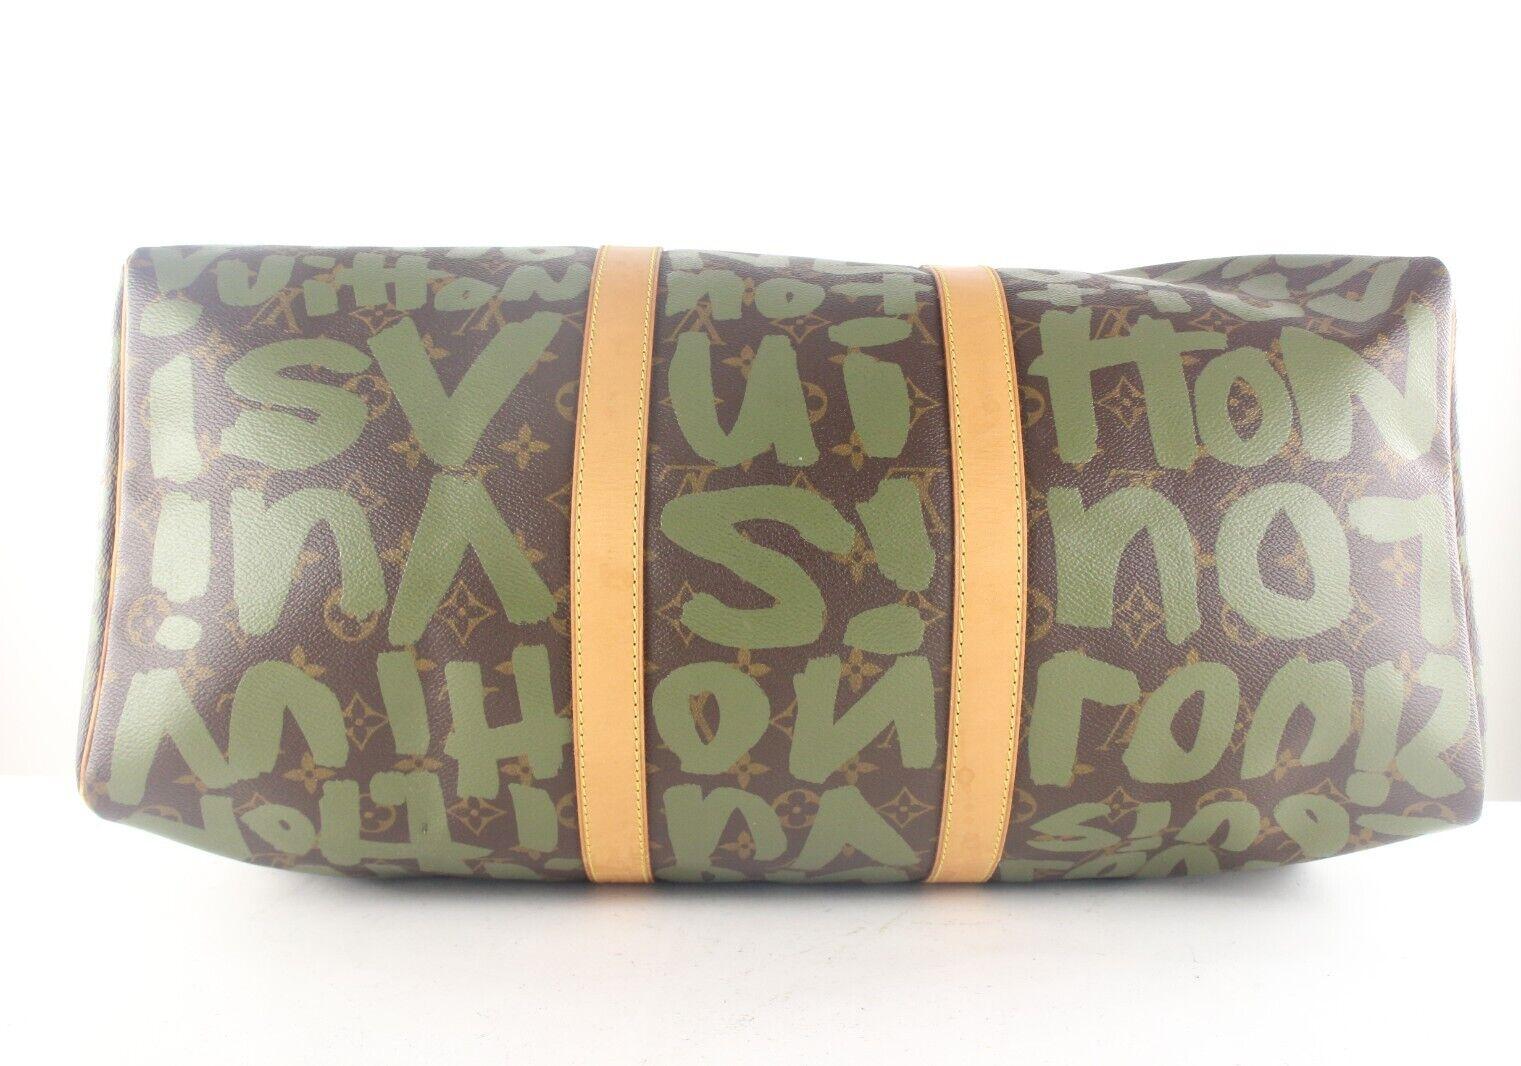 Louis Vuitton Stephen Sprouse Monogram Graffiti Keepall 50 Khaki Green 1LK919K In Good Condition For Sale In Dix hills, NY